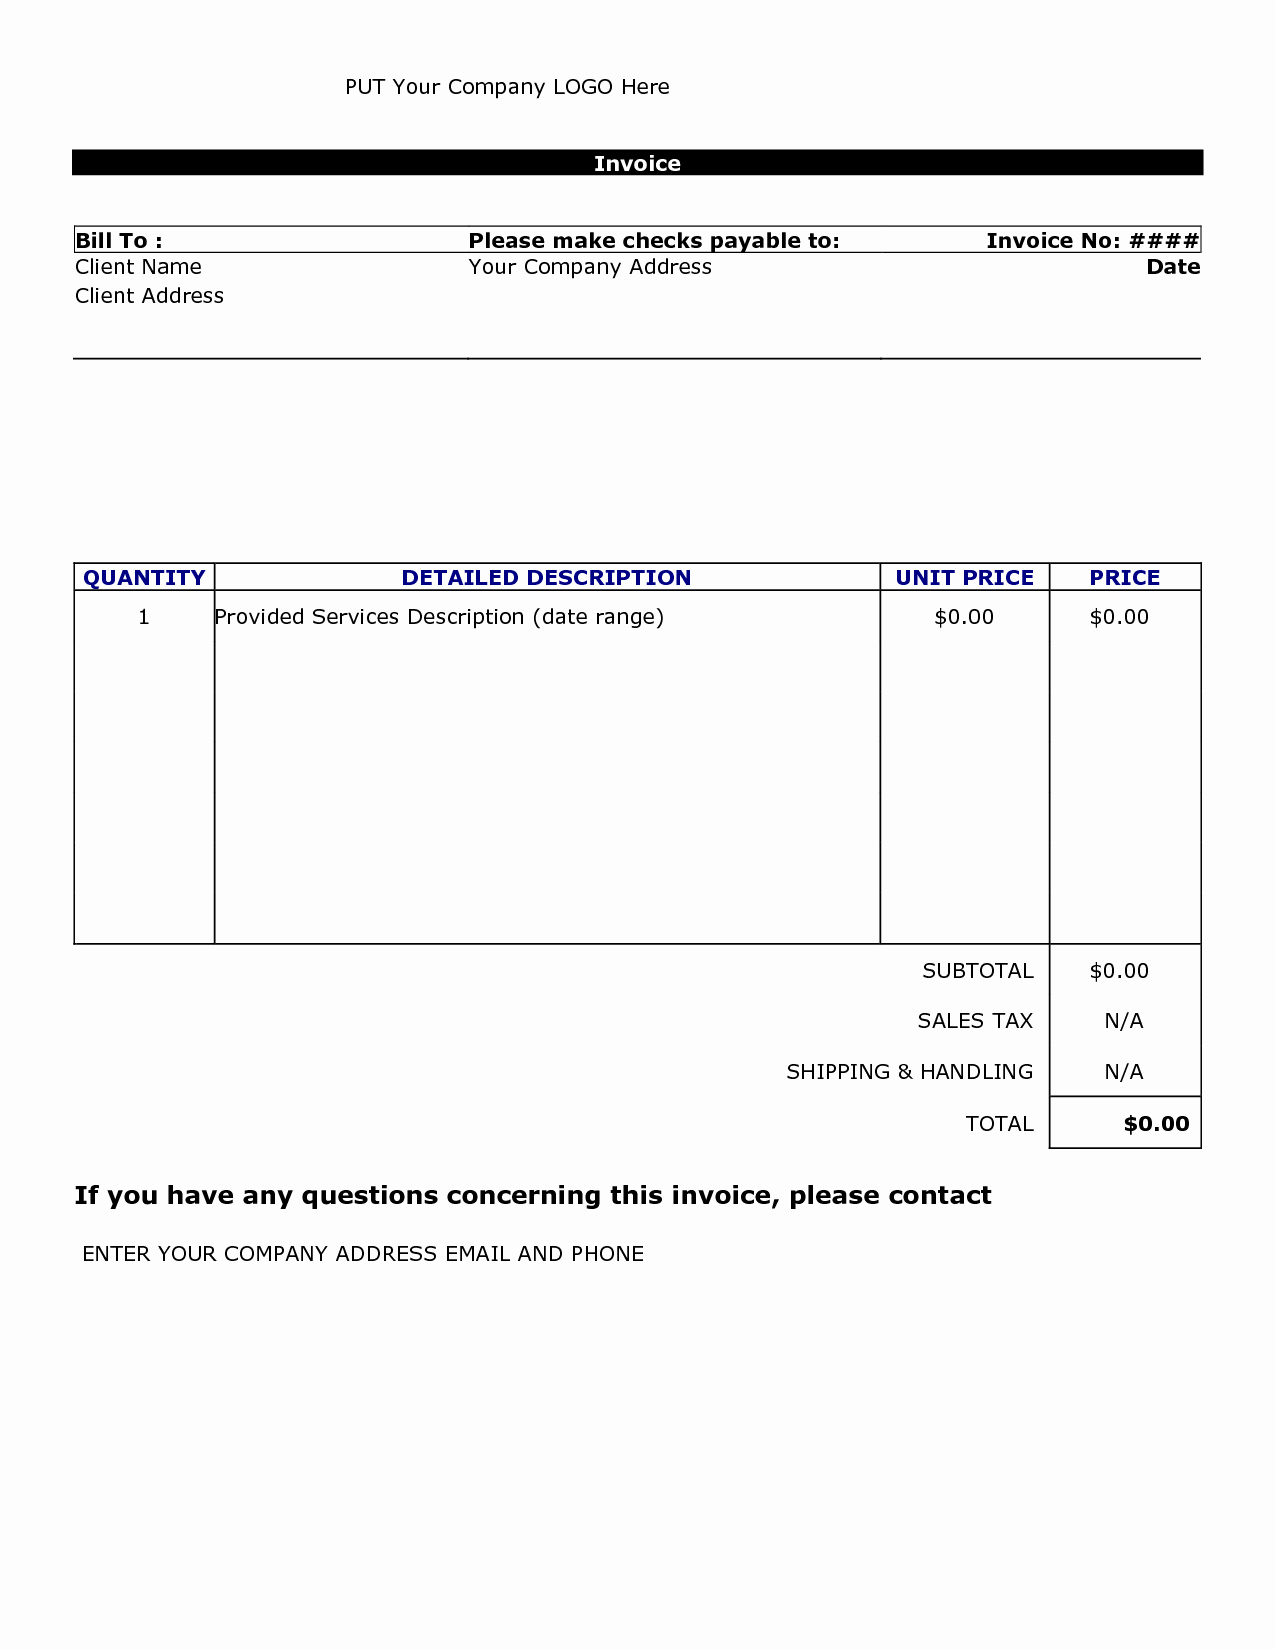 Invoice Template for Microsoft Word Elegant Invoice Template Word 2010